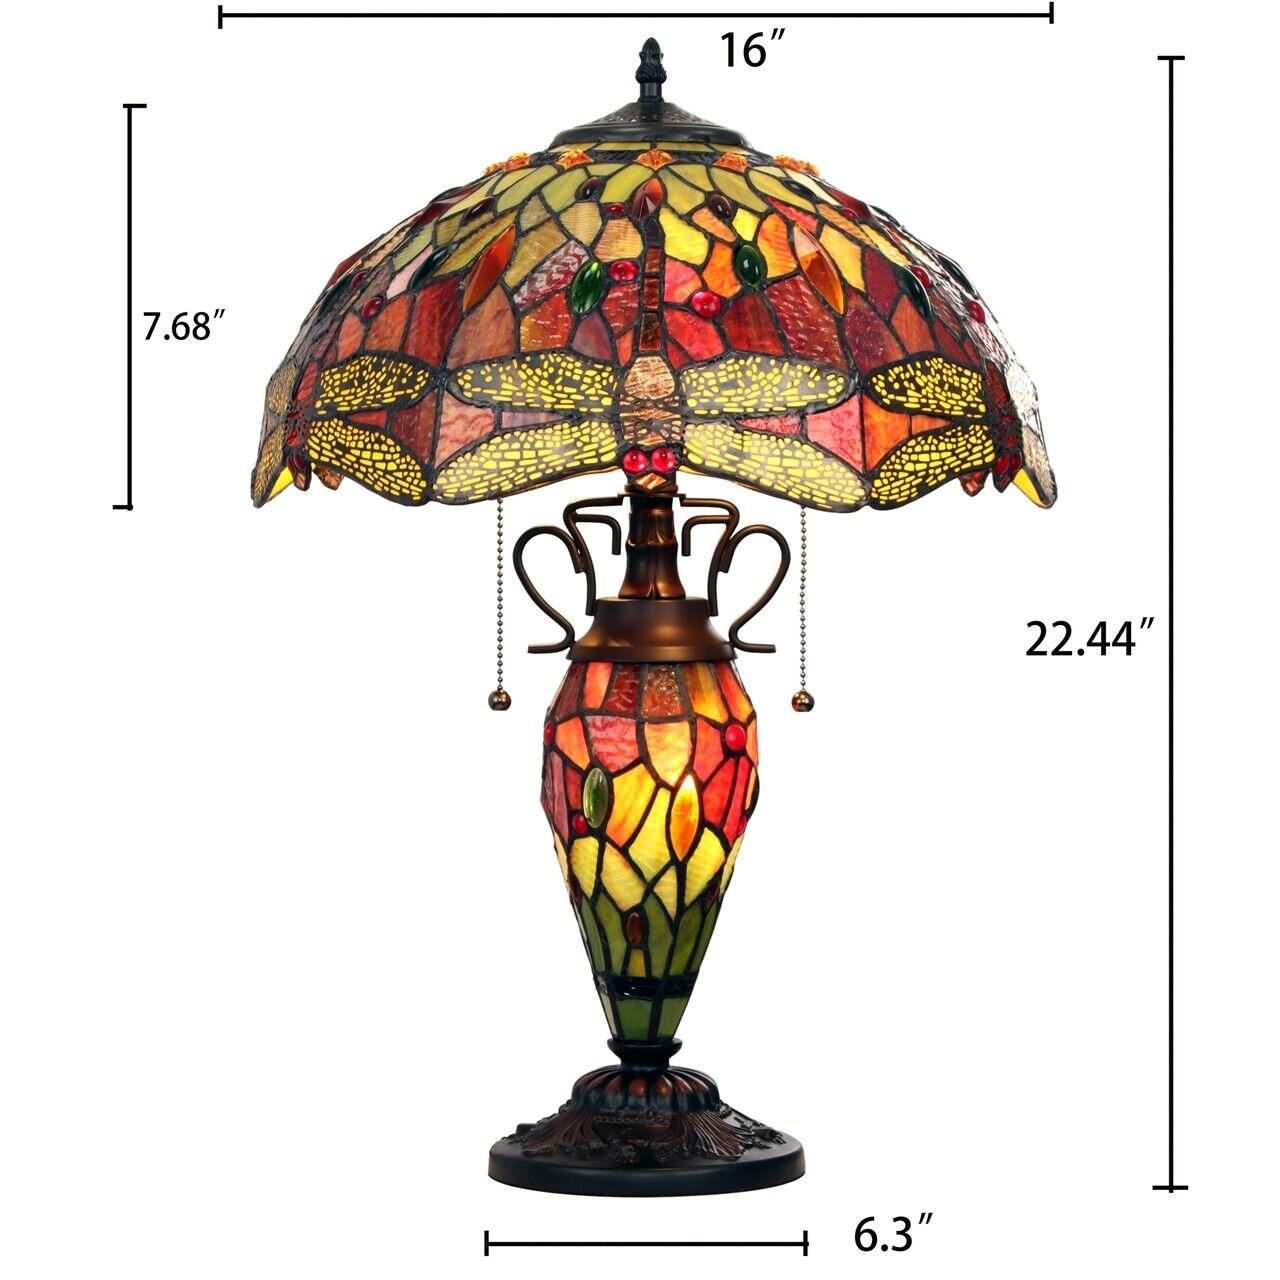 22.44" Antique Vintage Style Stained Glass Dragonfly Lighted Base Table Lamp